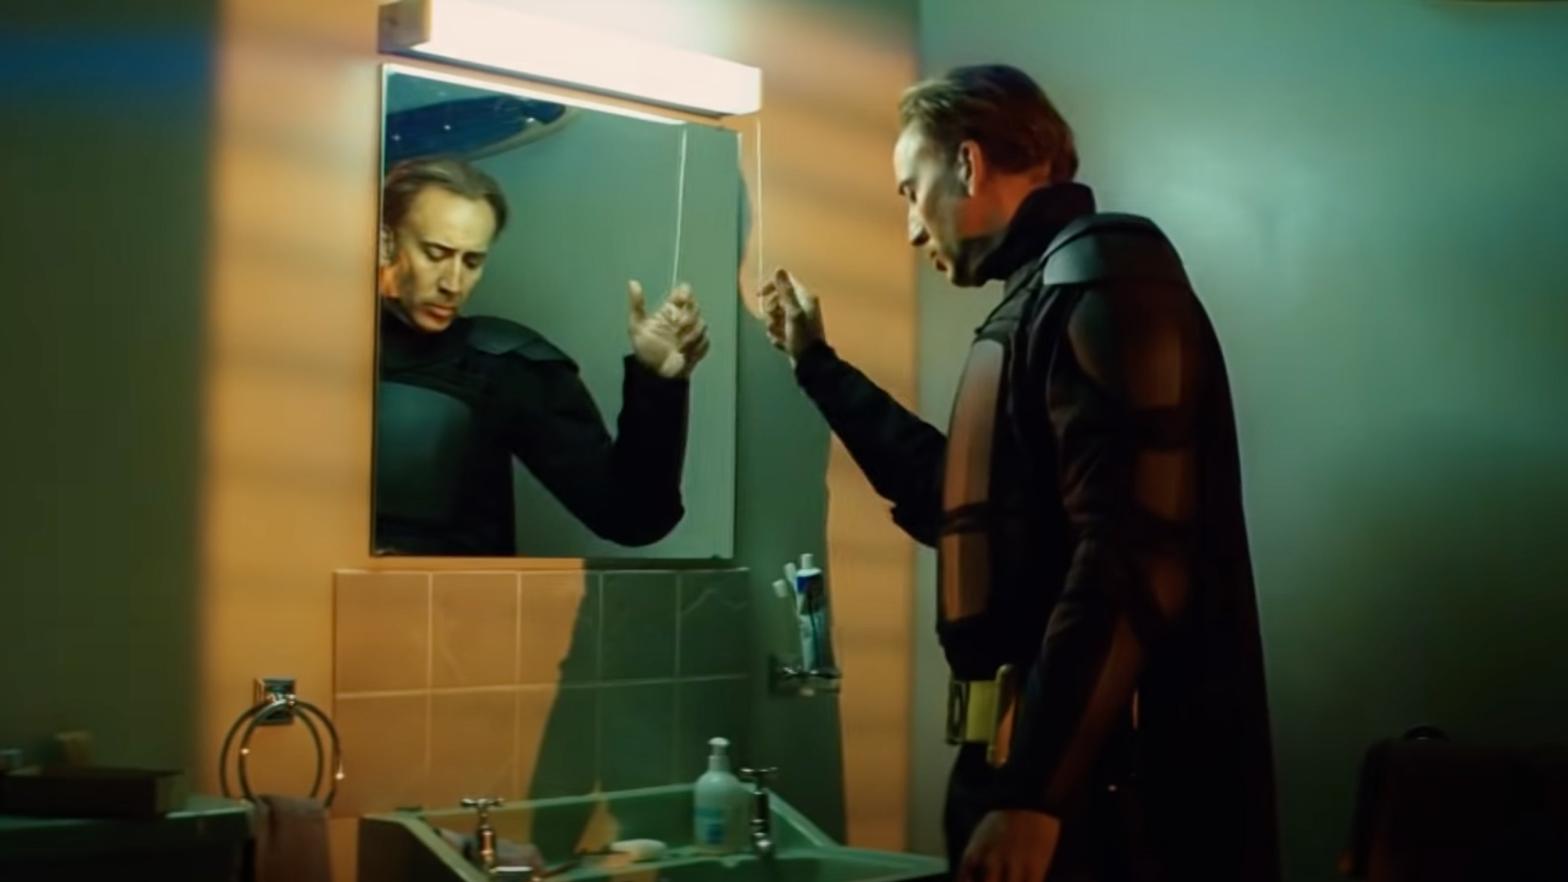 Big Daddy, wearing all of his armour except his mask, turns on a light above a bathroom sink. (Screenshot: Lionsgate)